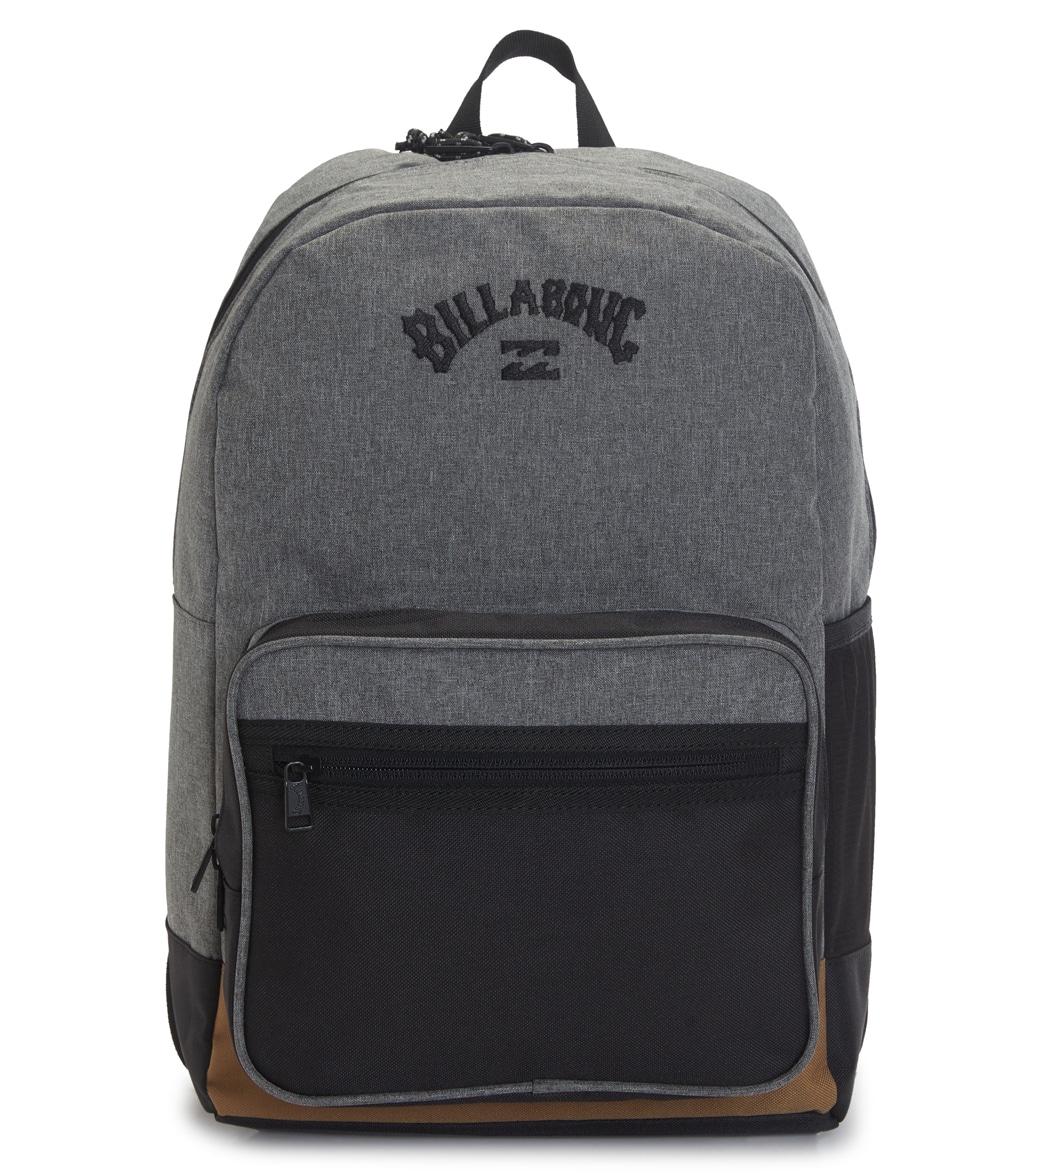 Billabong Men's All Day Plus Backpack - Grey Heather One Size - Swimoutlet.com